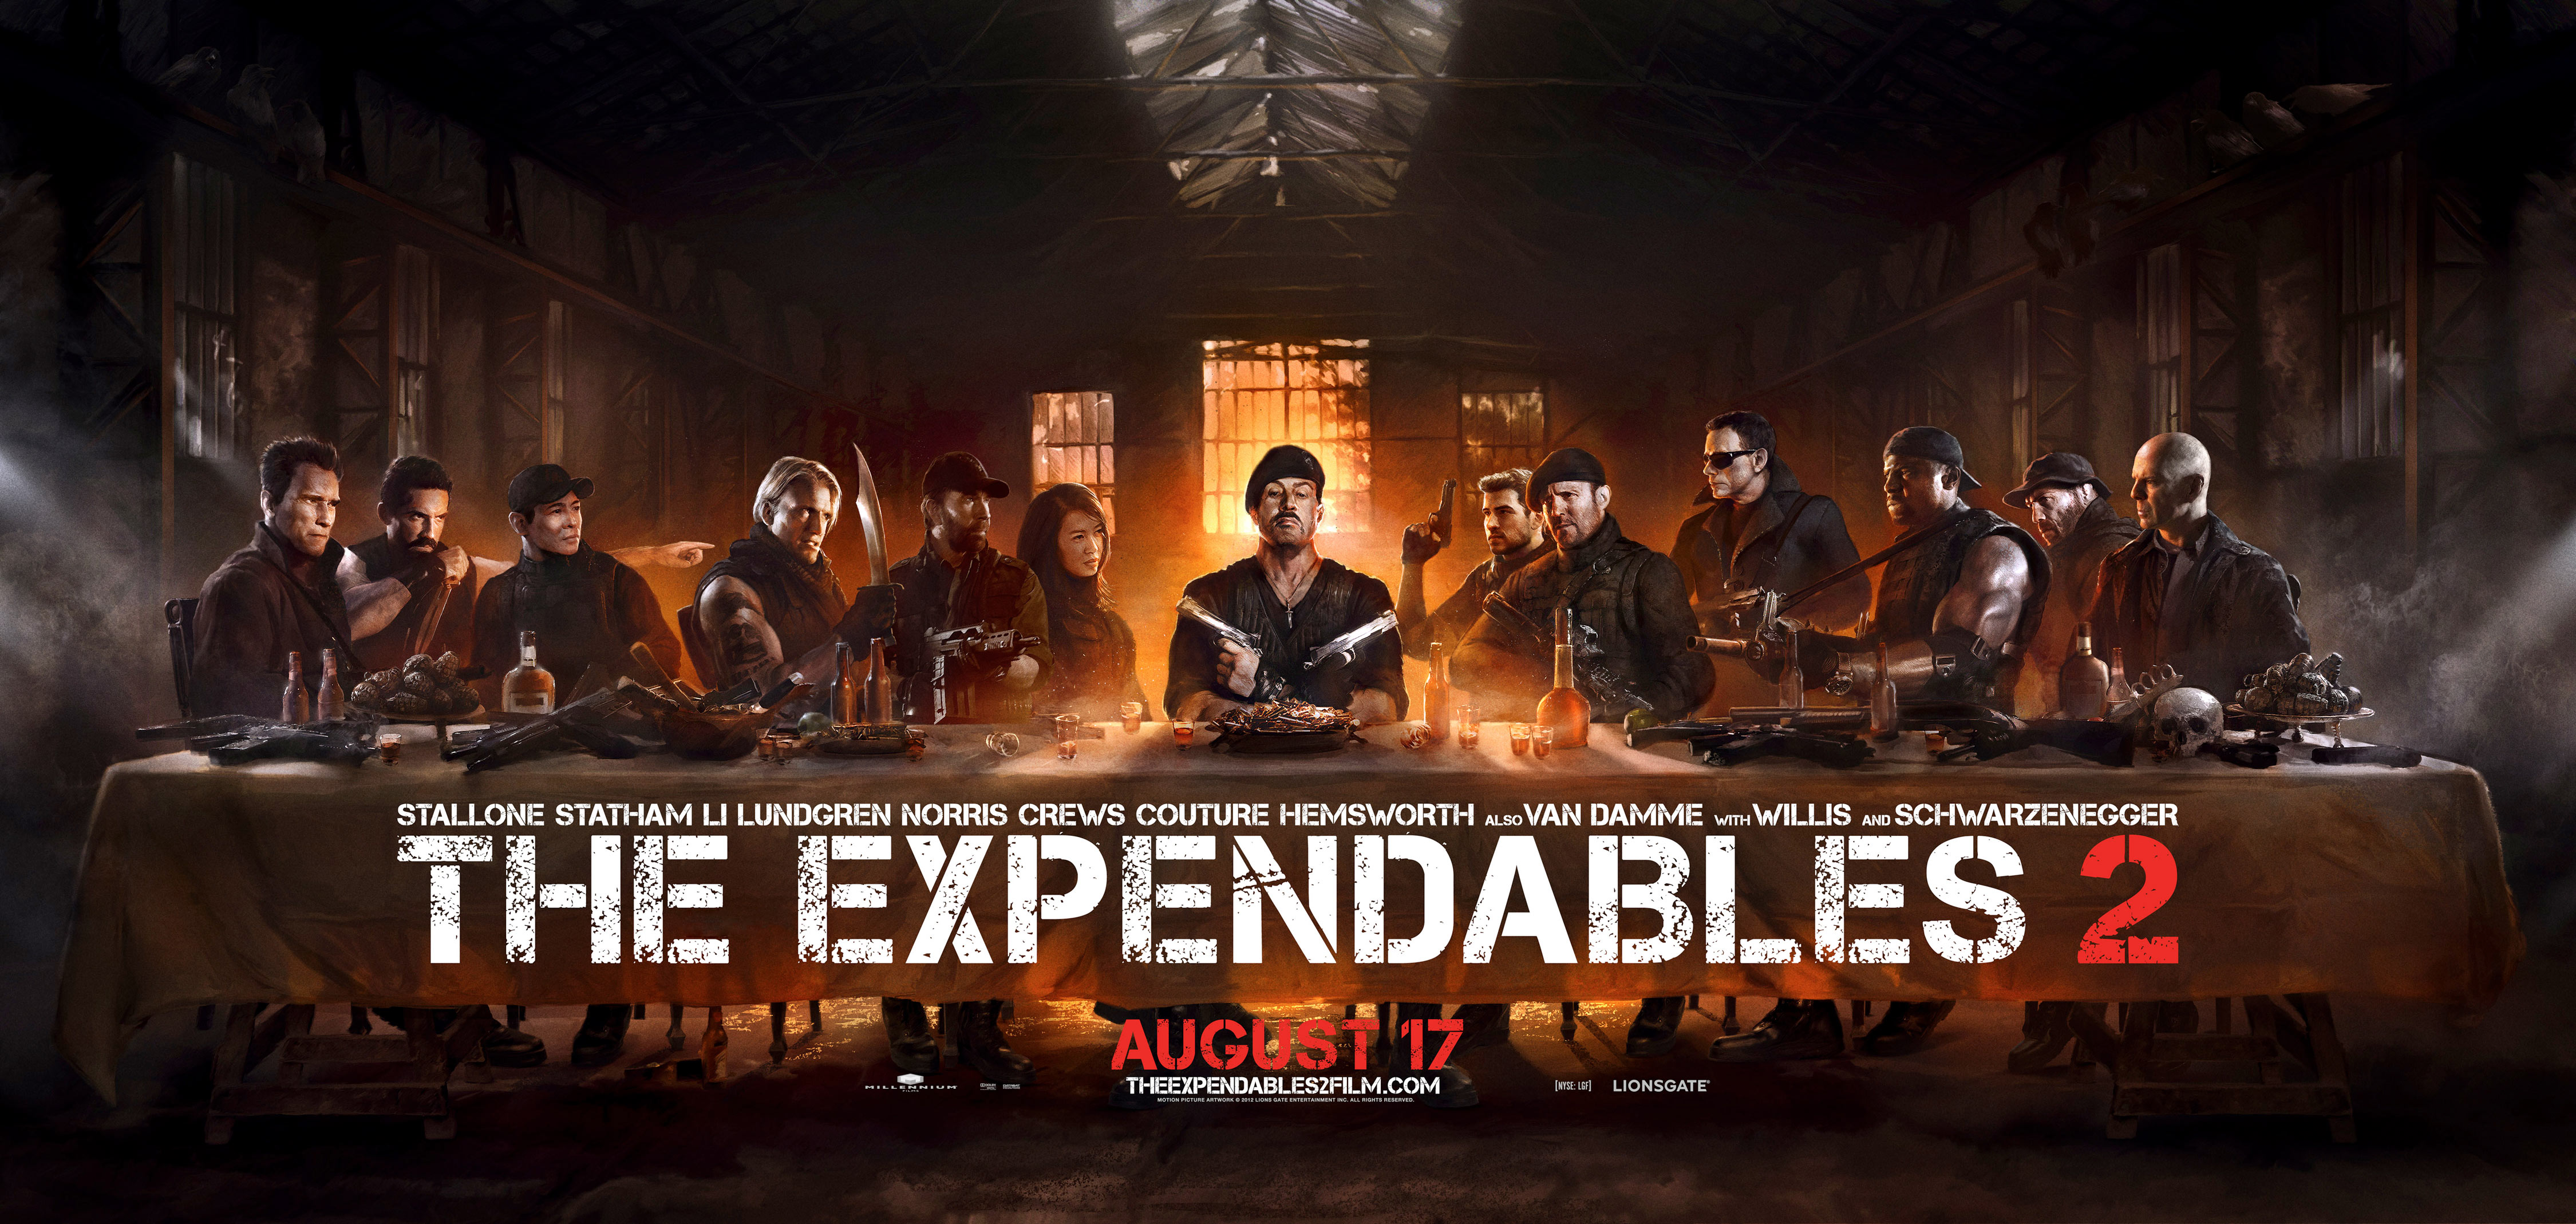 movie, the expendables 2, arnold schwarzenegger, barney ross, billy (the expendables), booker (the expendables), bruce willis, chuck norris, church (the expendables), dolph lundgren, gunnar jensen, hale caesar, jason statham, jean claude van damme, jet li, lee christmas, liam hemsworth, maggie (the expendables), nan yu, randy couture, sylvester stallone, terry crews, toll road, trench (the expendables), vilain (the expendables), yin yang (the expendables), the expendables iphone wallpaper